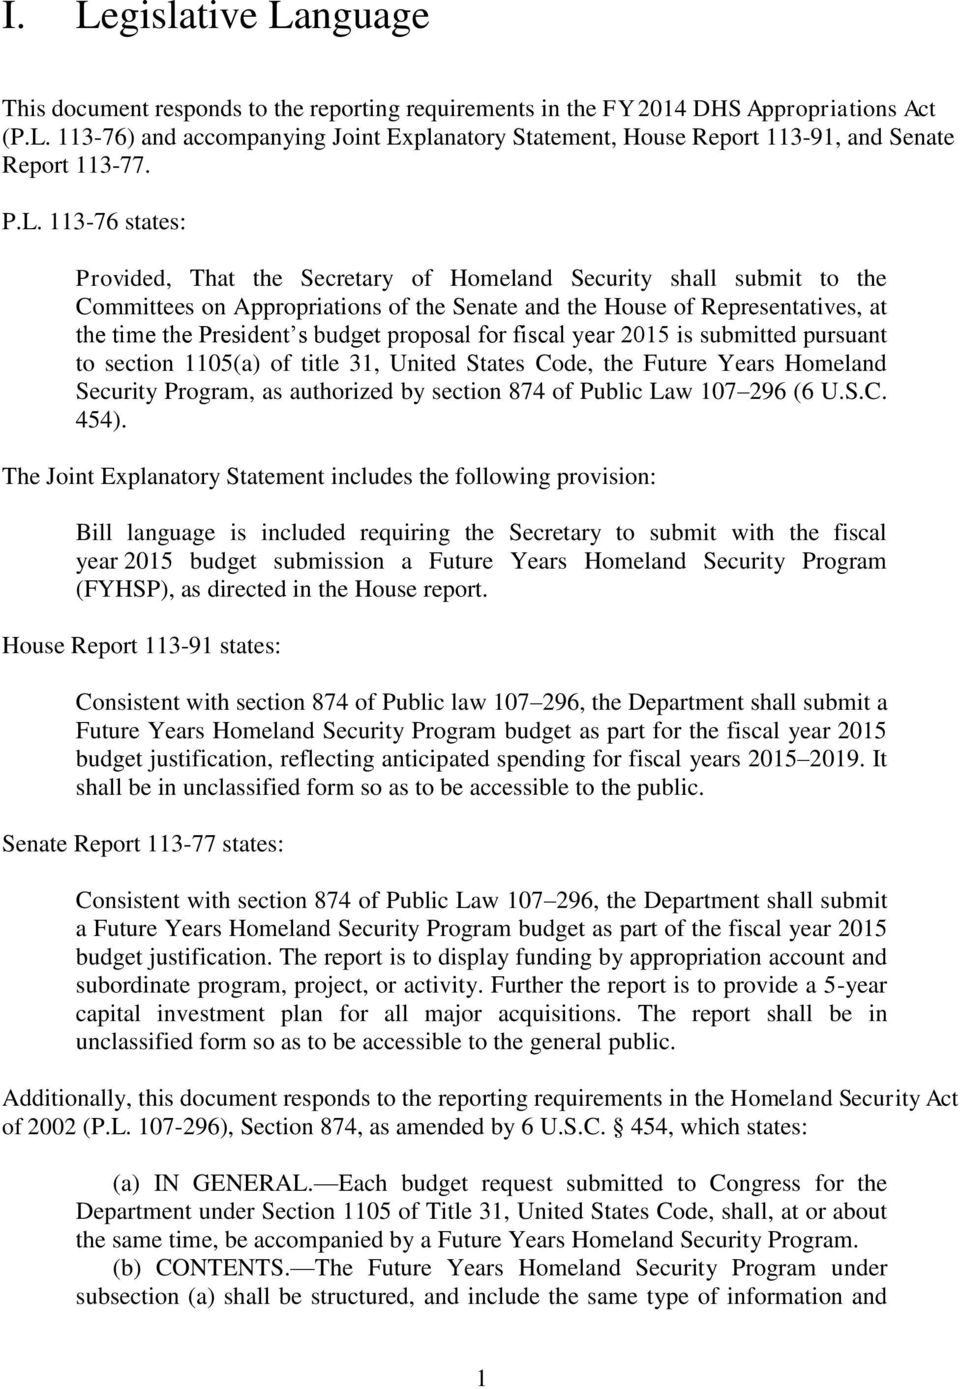 budget proposal for fiscal year 2015 is submitted pursuant to section 1105(a) of title 31, United States Code, the Future Years Homeland Security Program, as authorized by section 874 of Public Law